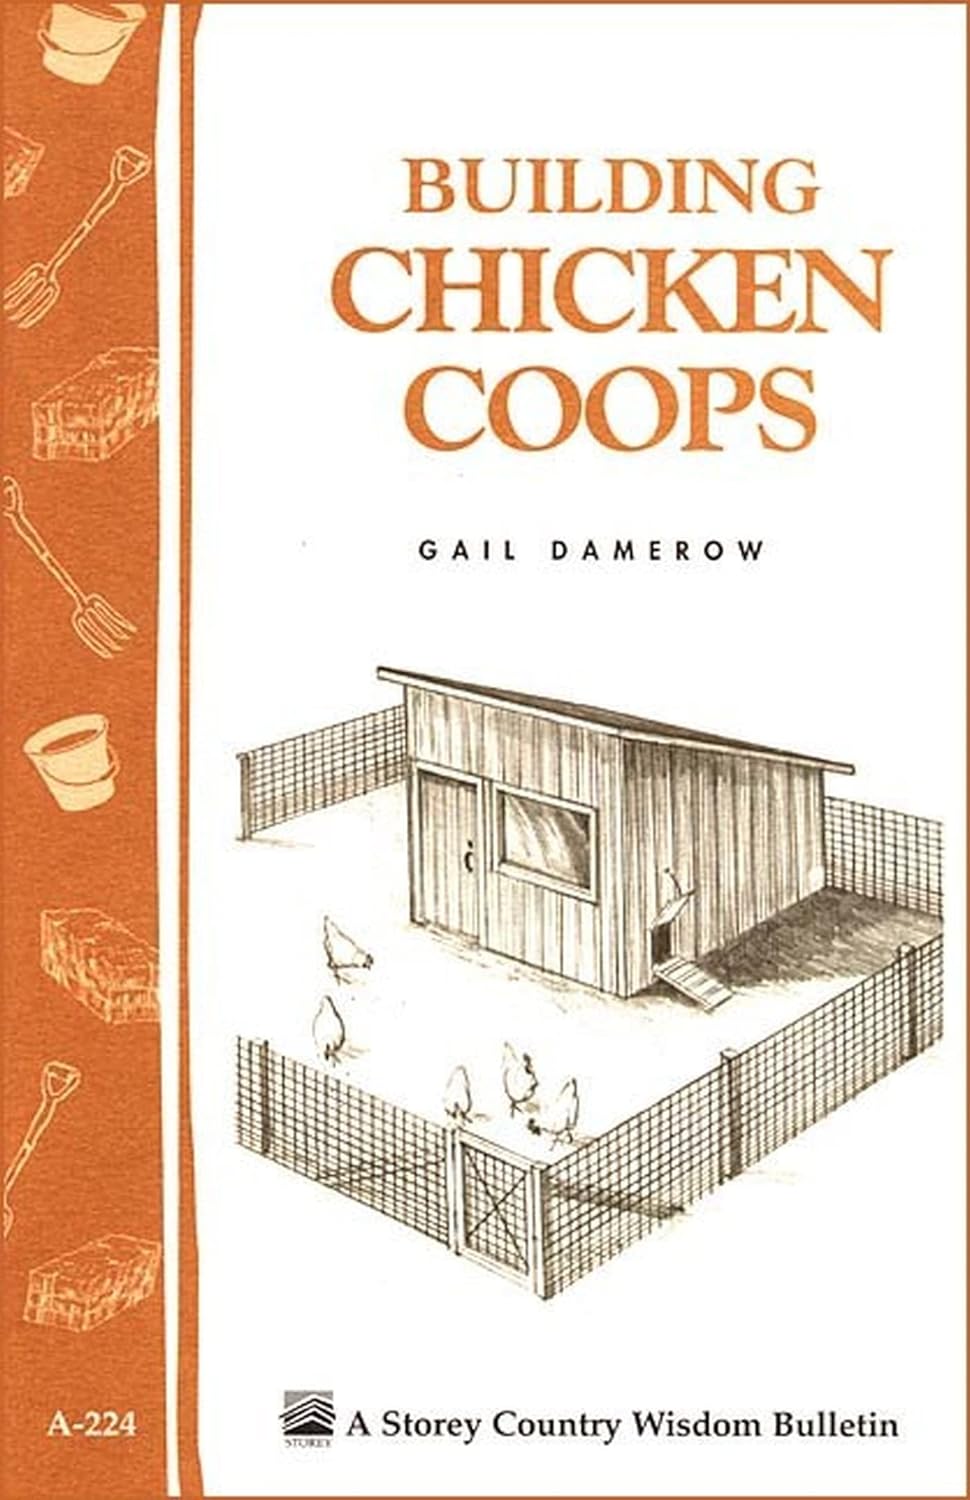 Storey’s Country Wisdom Bulletin: Building Chicken Coops - by Gail Damerow